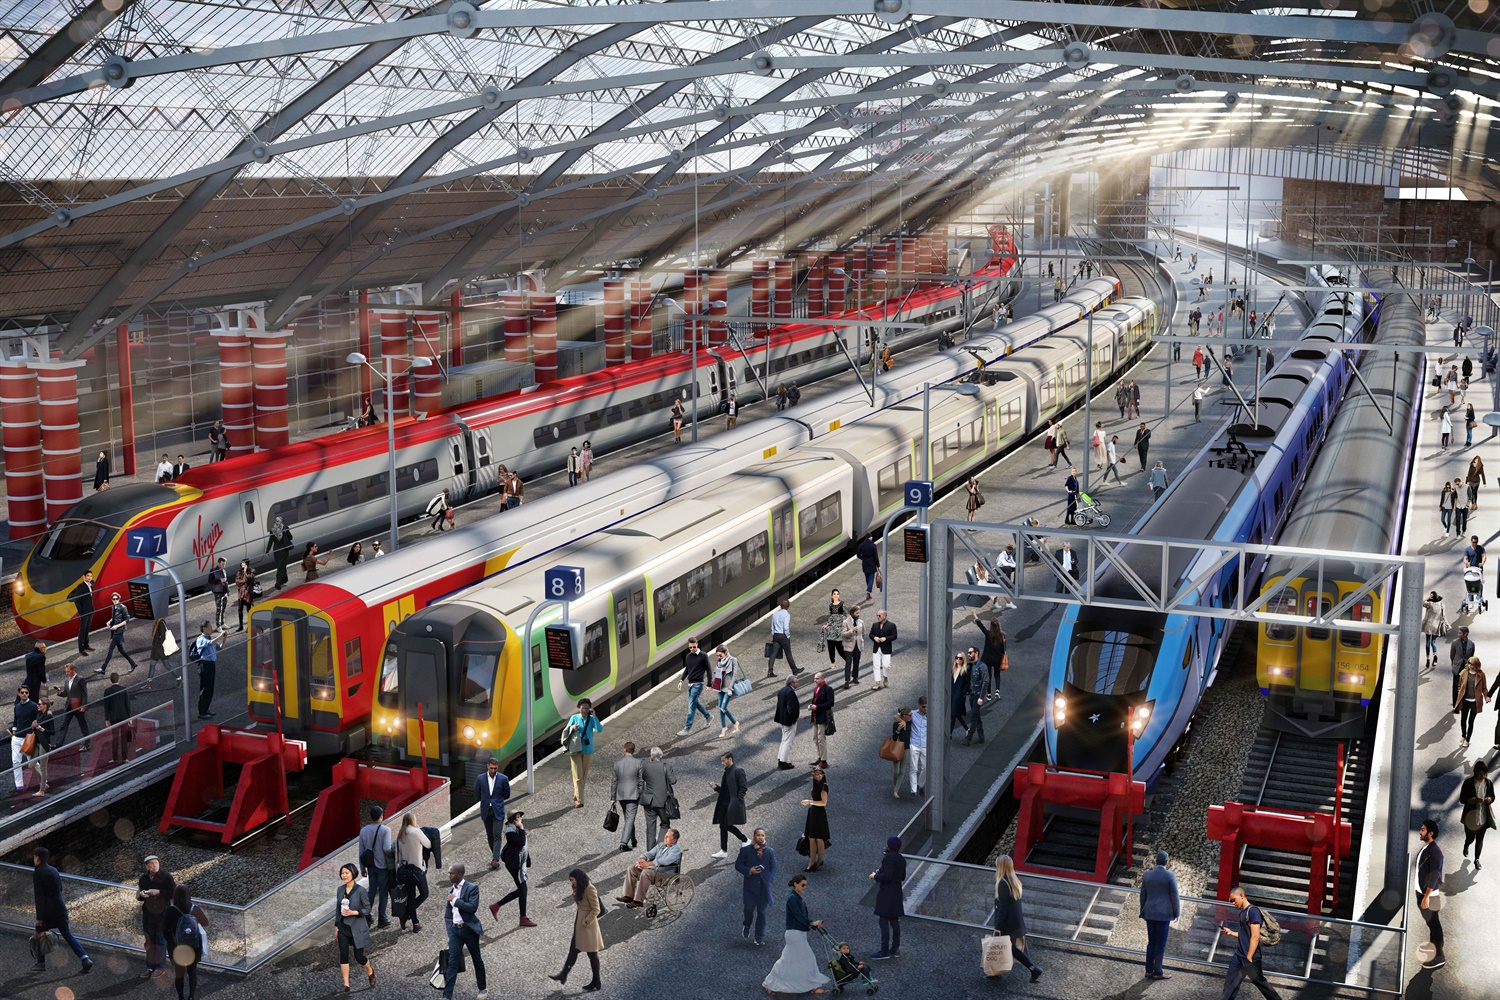 NR states ambition to keep Liverpool moving during major Lime Street work